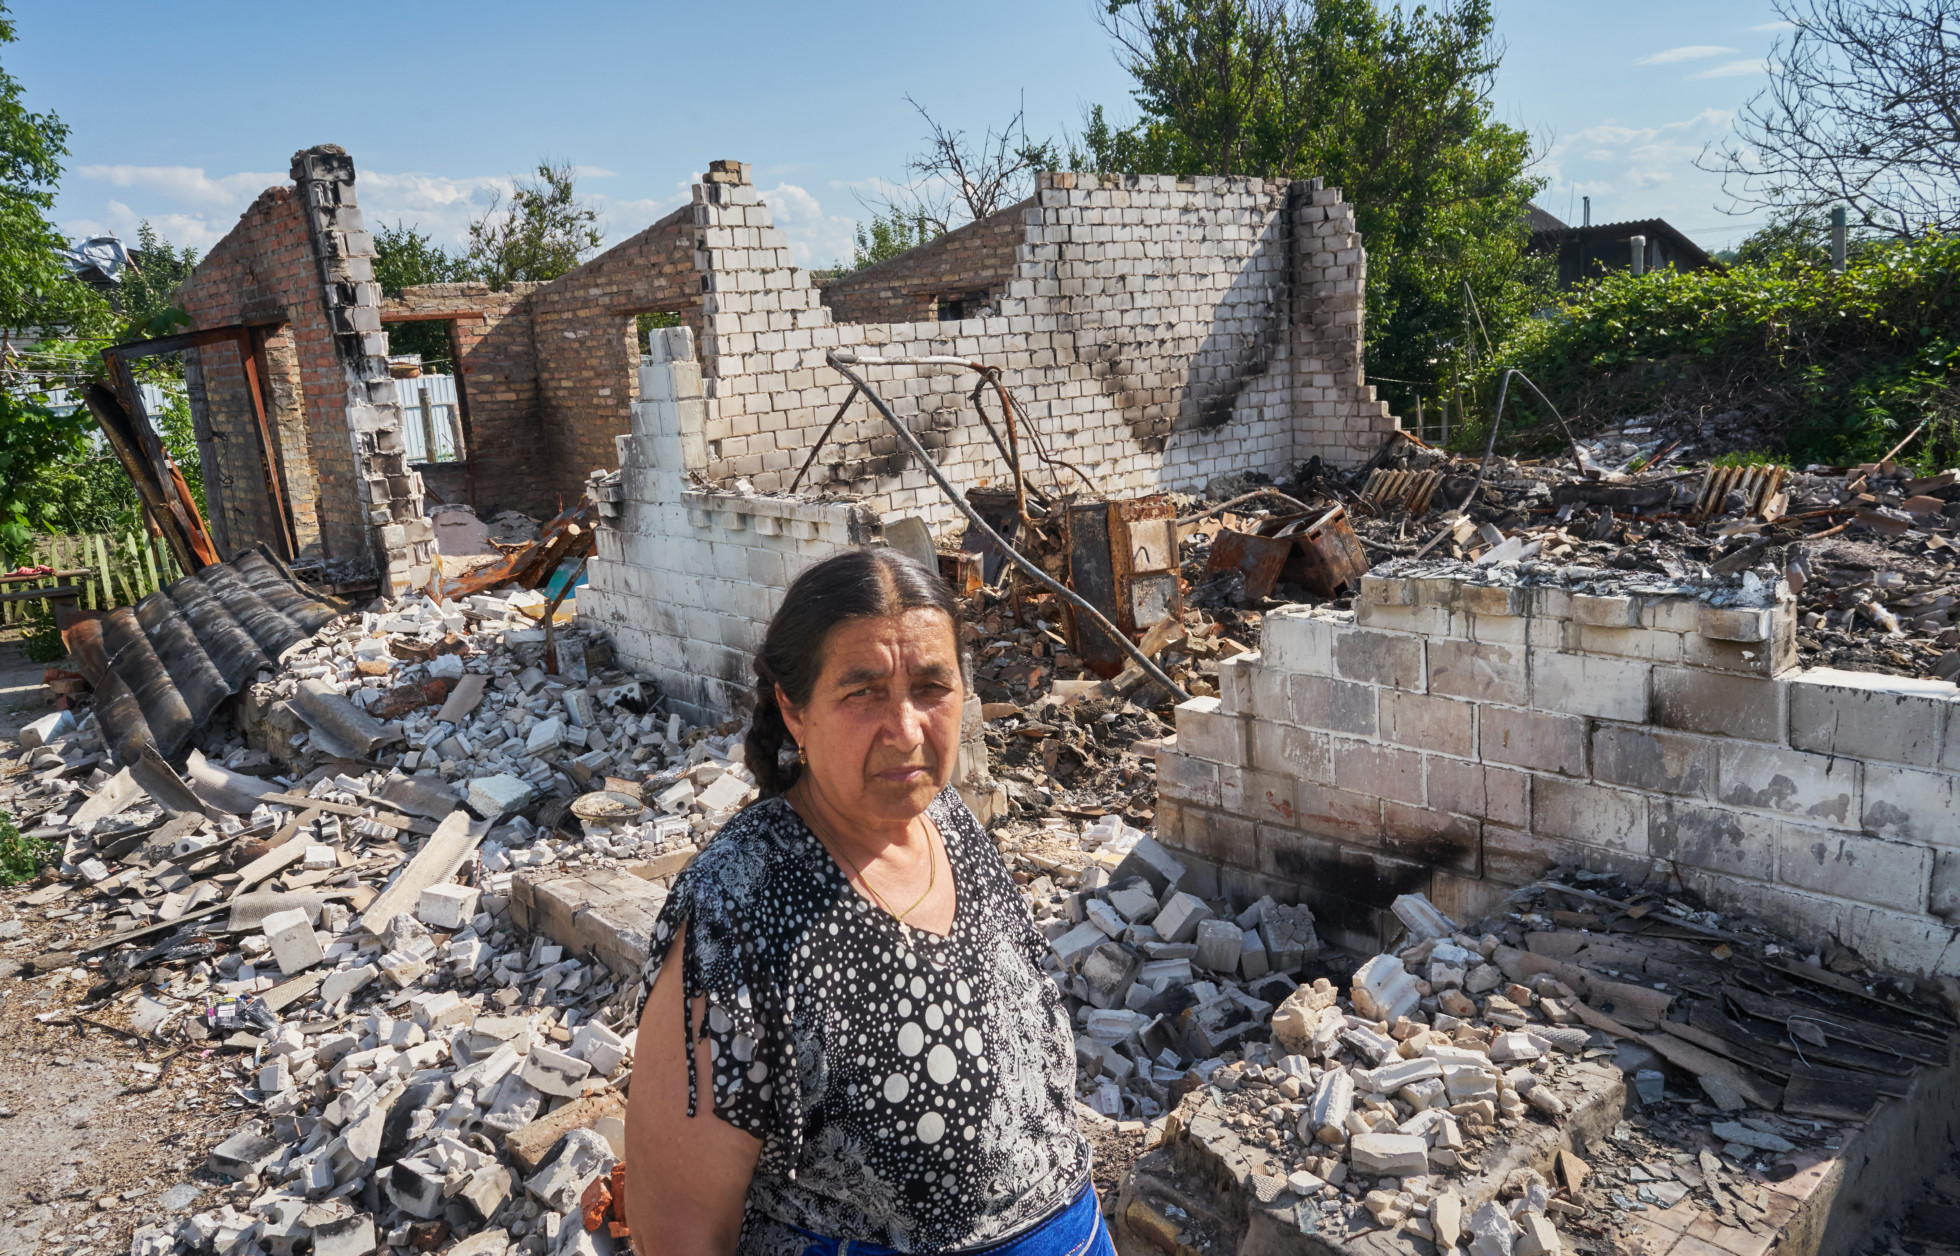 Nastasia Balanova: " I left on the fifth of March, on the sixth of March neighbours called us that our house had burned down. They sent us a video. I arrived back at the end of April. For now I live with my neighbour. In this house my son lived and my grandchild. My son lives in a barn. No one gave us anything, many came to tell us we helped. But nobody helps us yet. If they give at least brics.